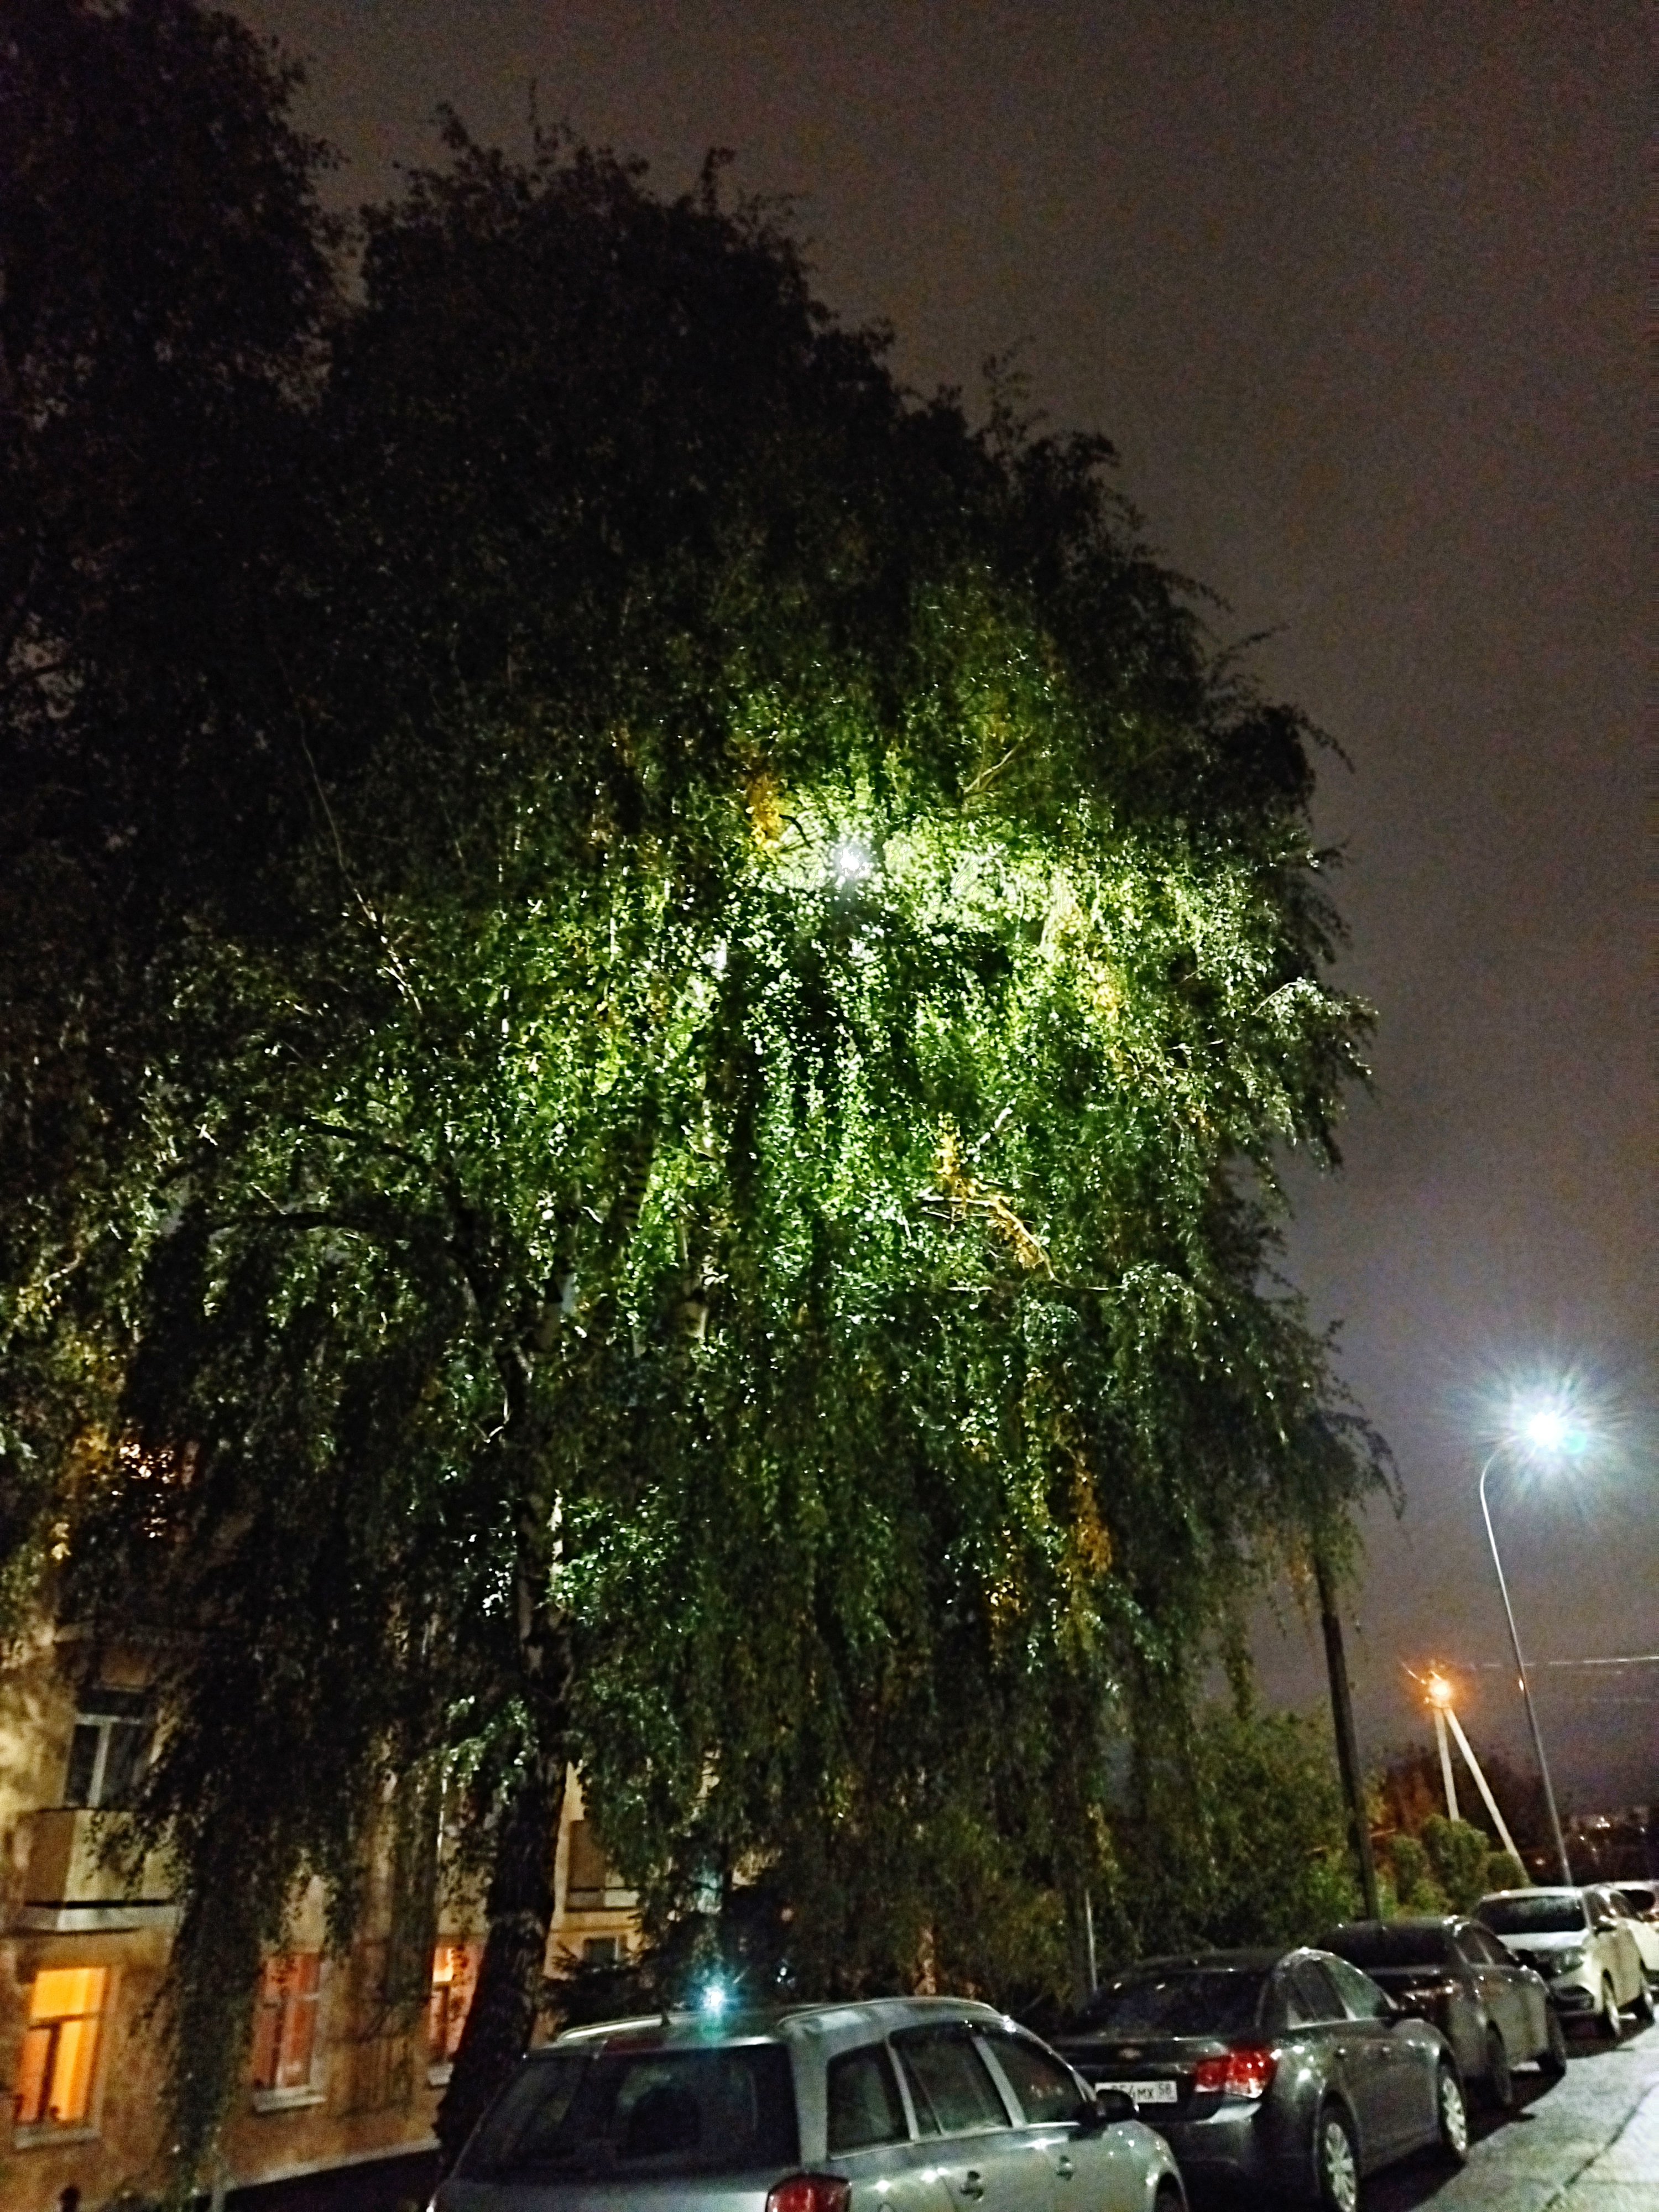 A photo of a tree, hiding a streetlamp in between its leaves.